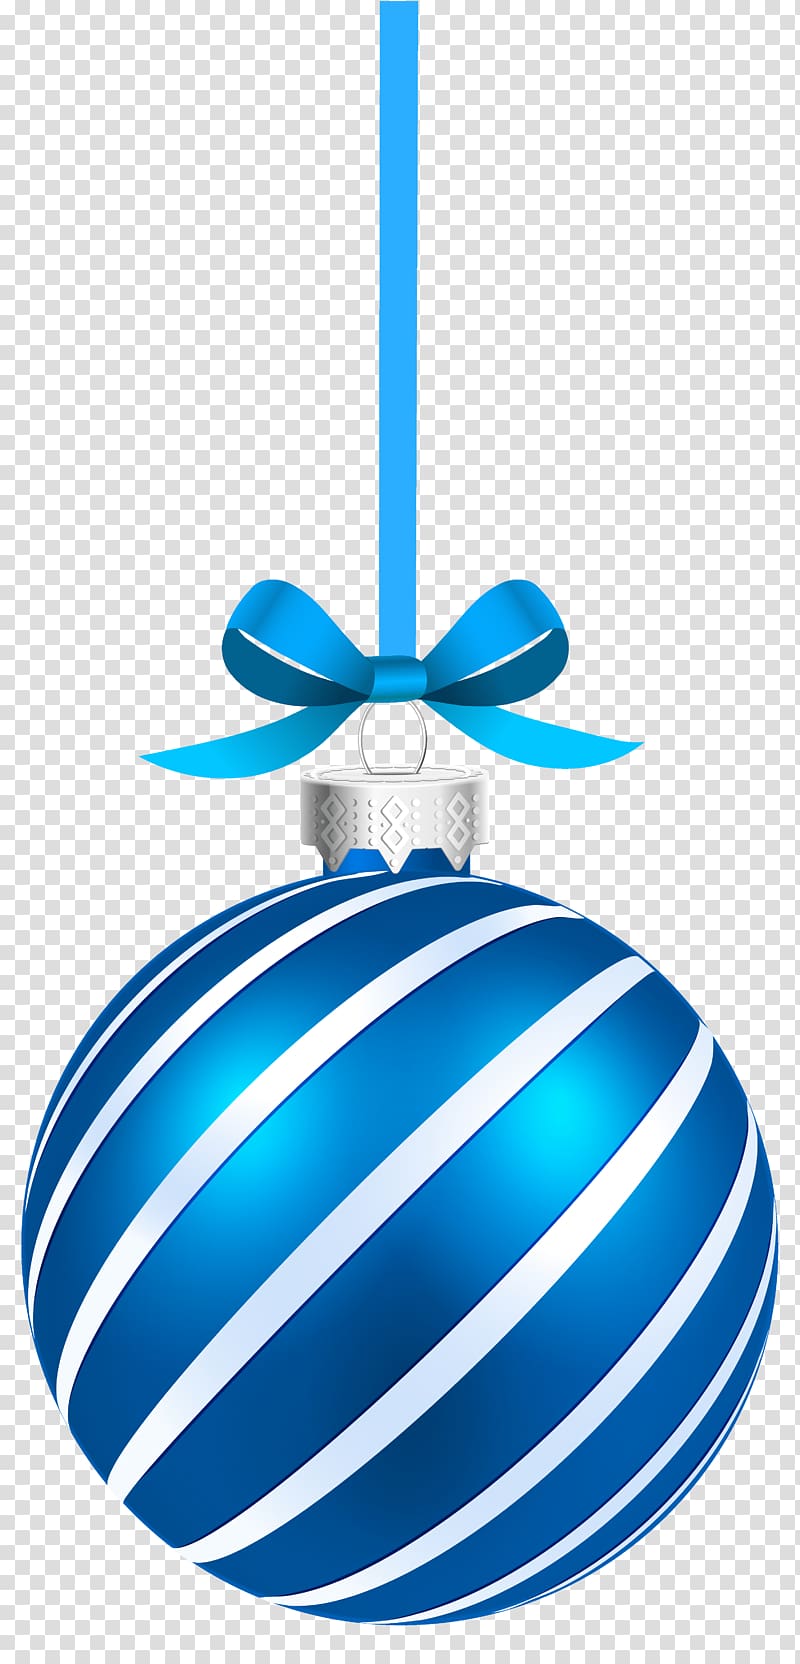 blue and white bauble illustration, Christmas ornament Christmas decoration Santa Claus , Blue Sriped Christmas Hanging Ball transparent background PNG clipart